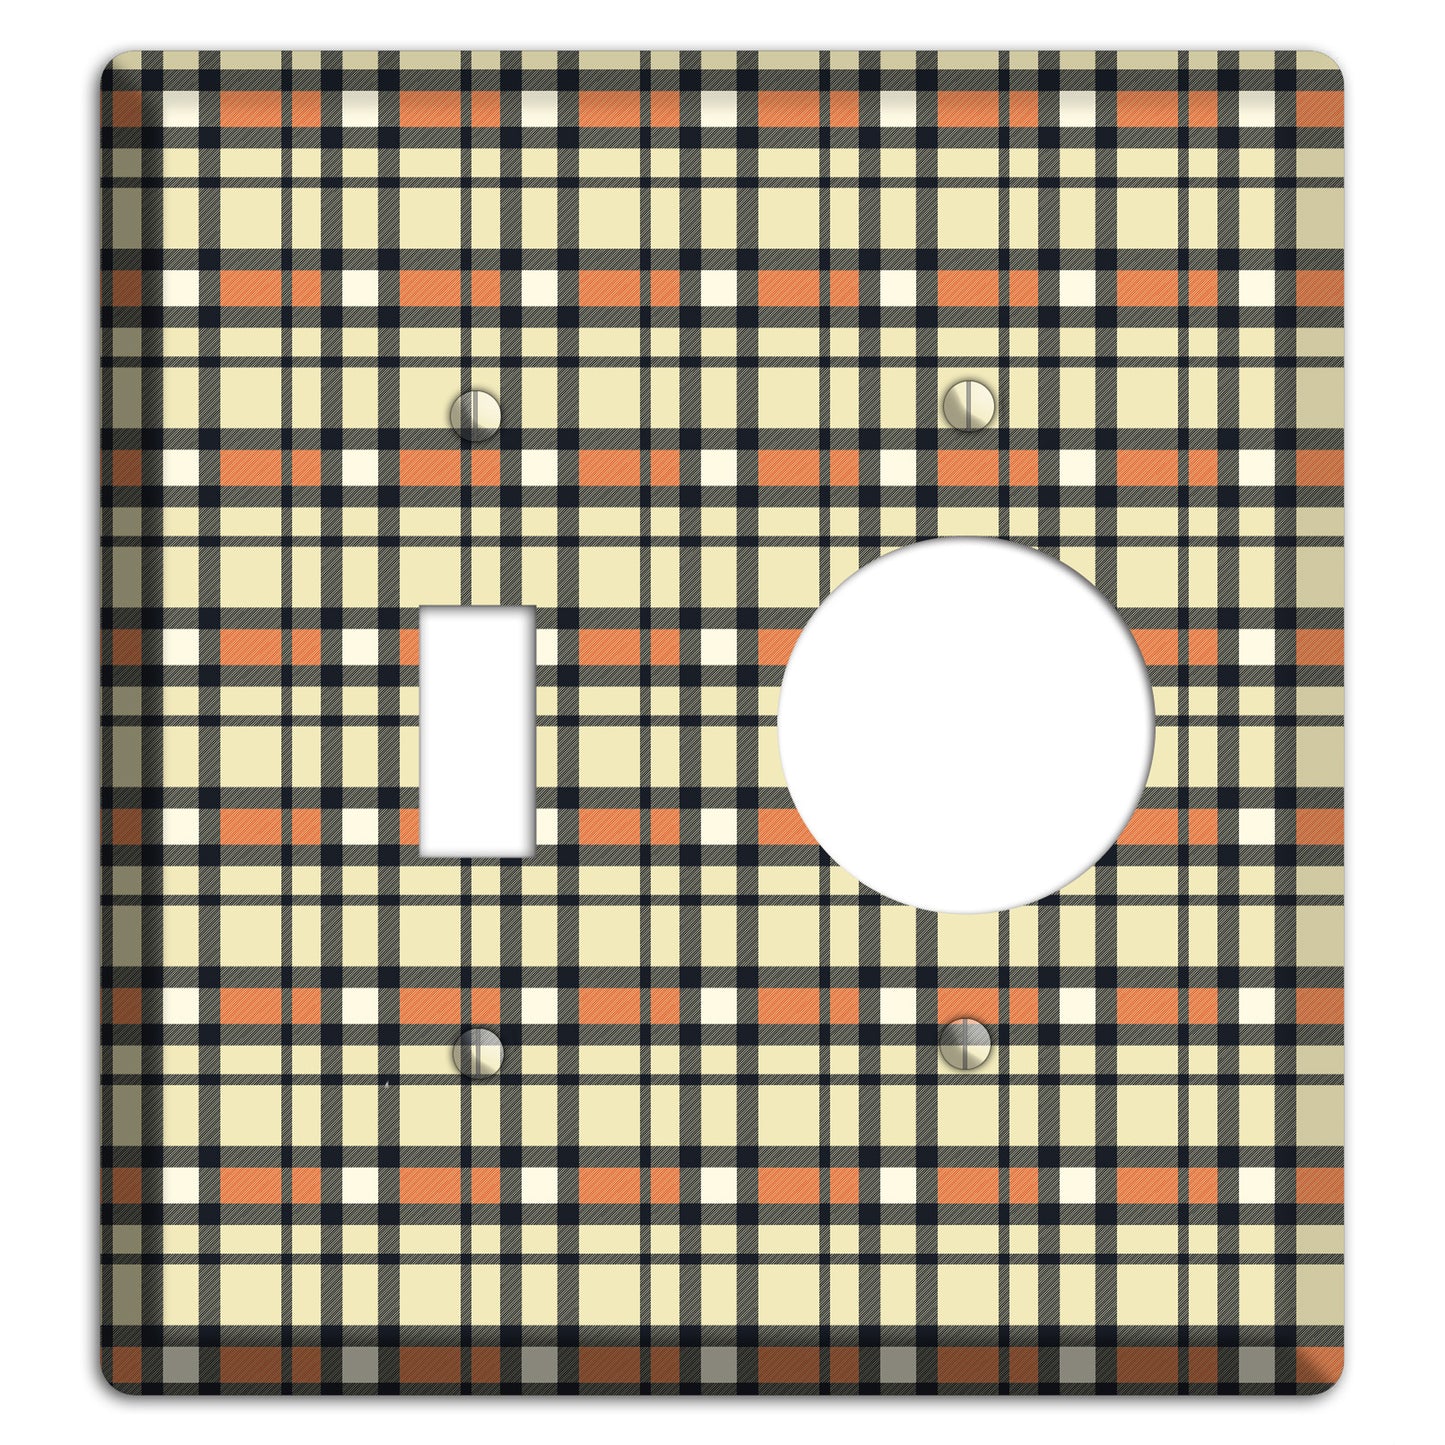 Beige and Brown Plaid Toggle / Receptacle Wallplate